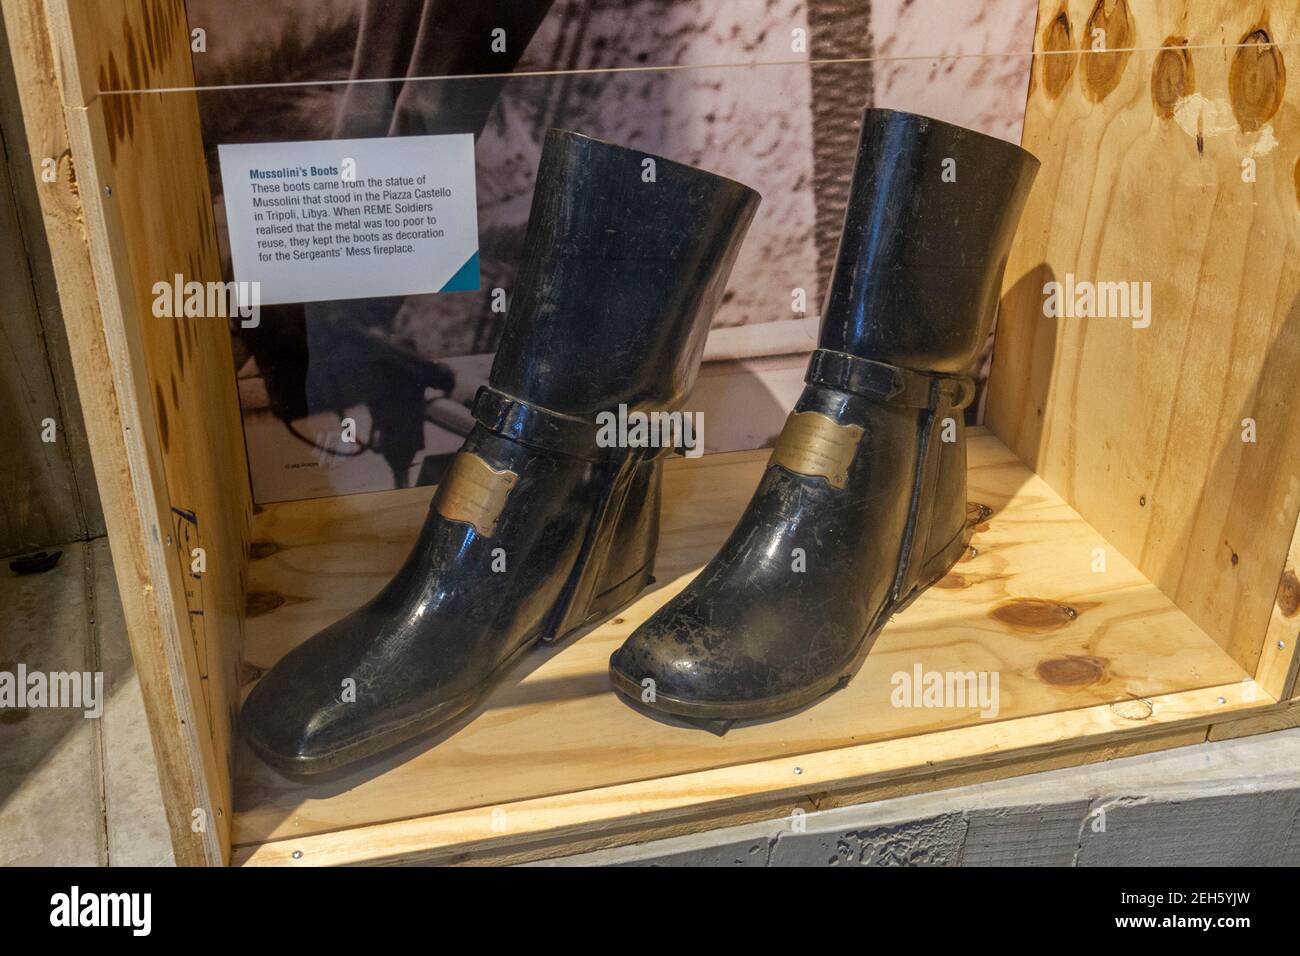 Original boots from the statue of Mussolini that stood in Piazza Castello in Tripoli, Libya on display in the REME Museum, Lyneham, Wiltshire, UK Stock Photo